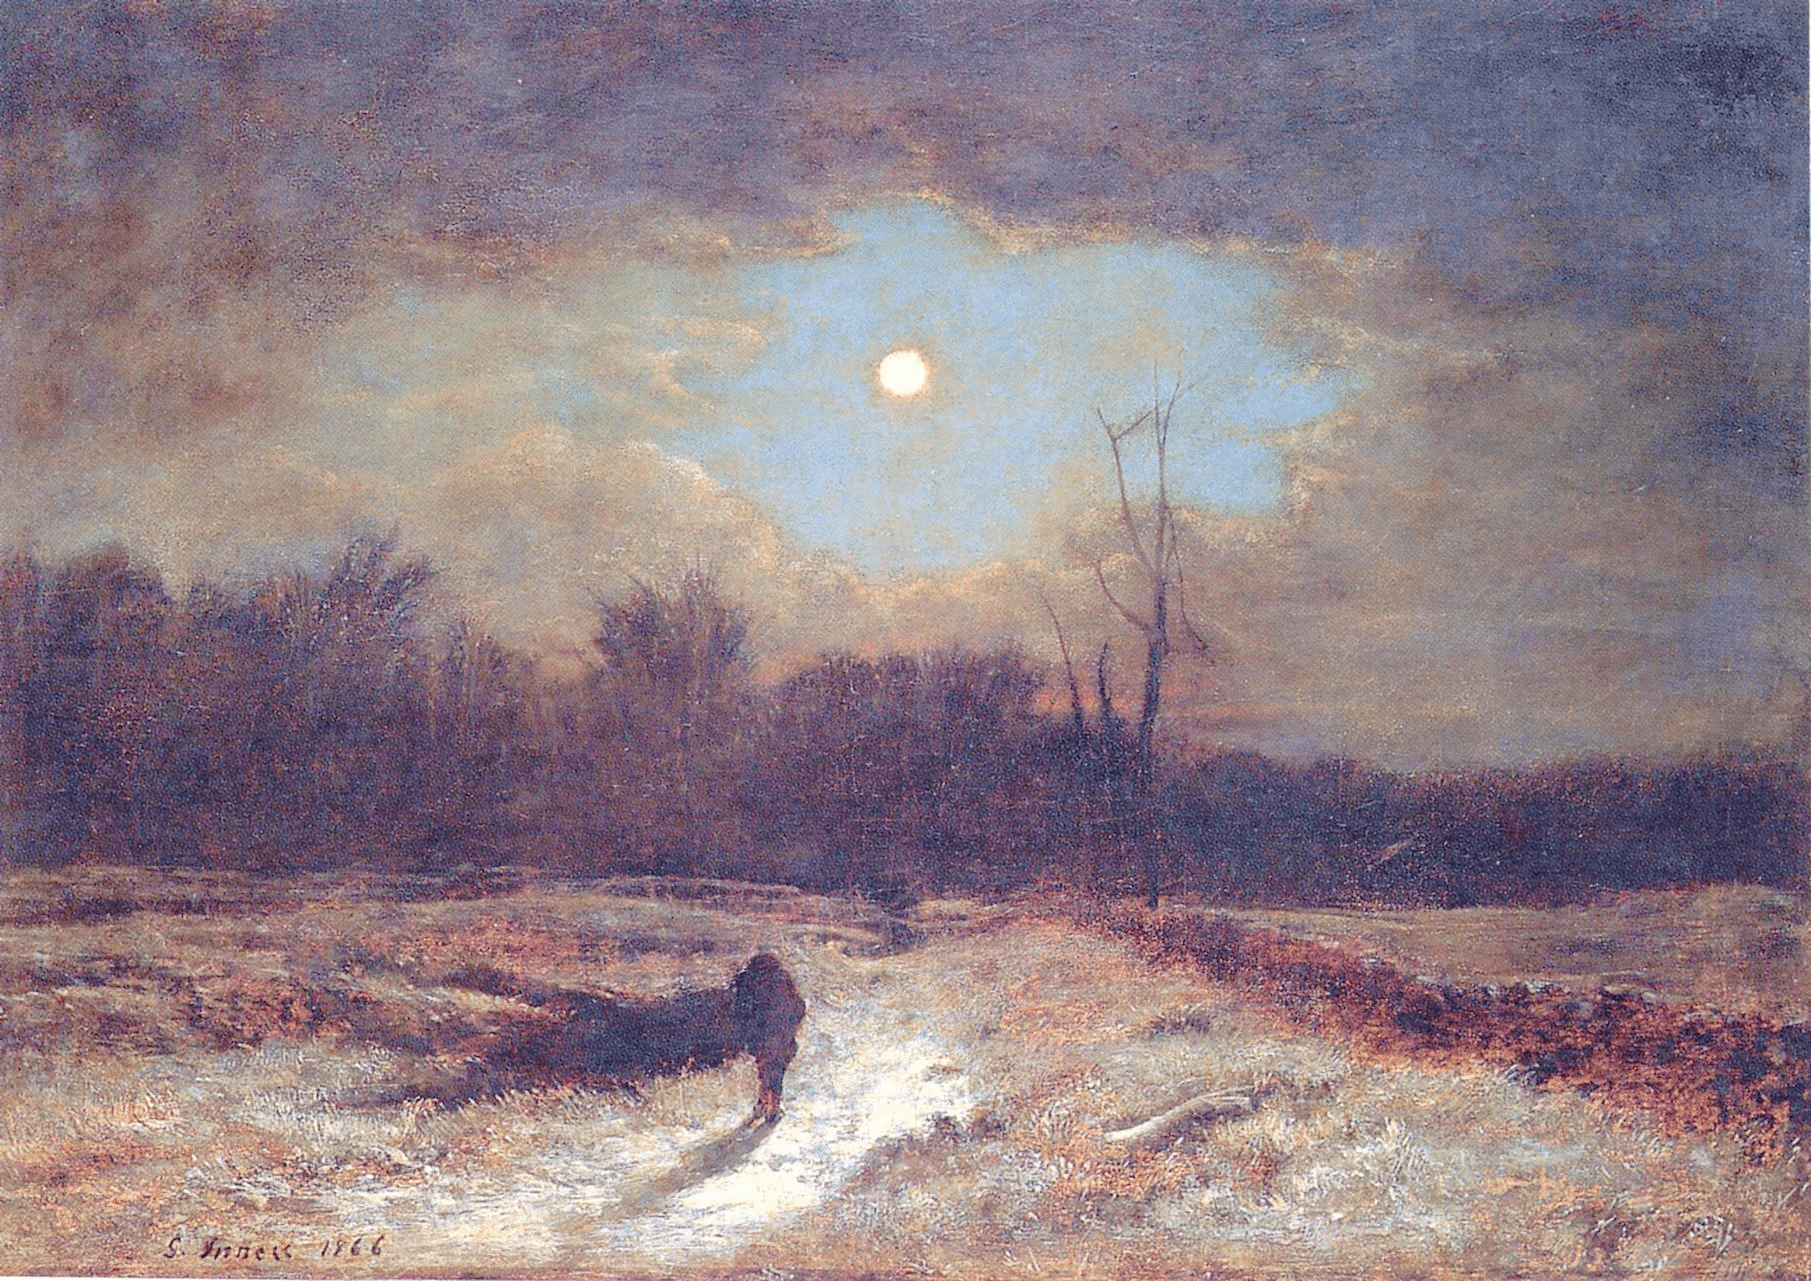 Christmas Eve by George Inness.